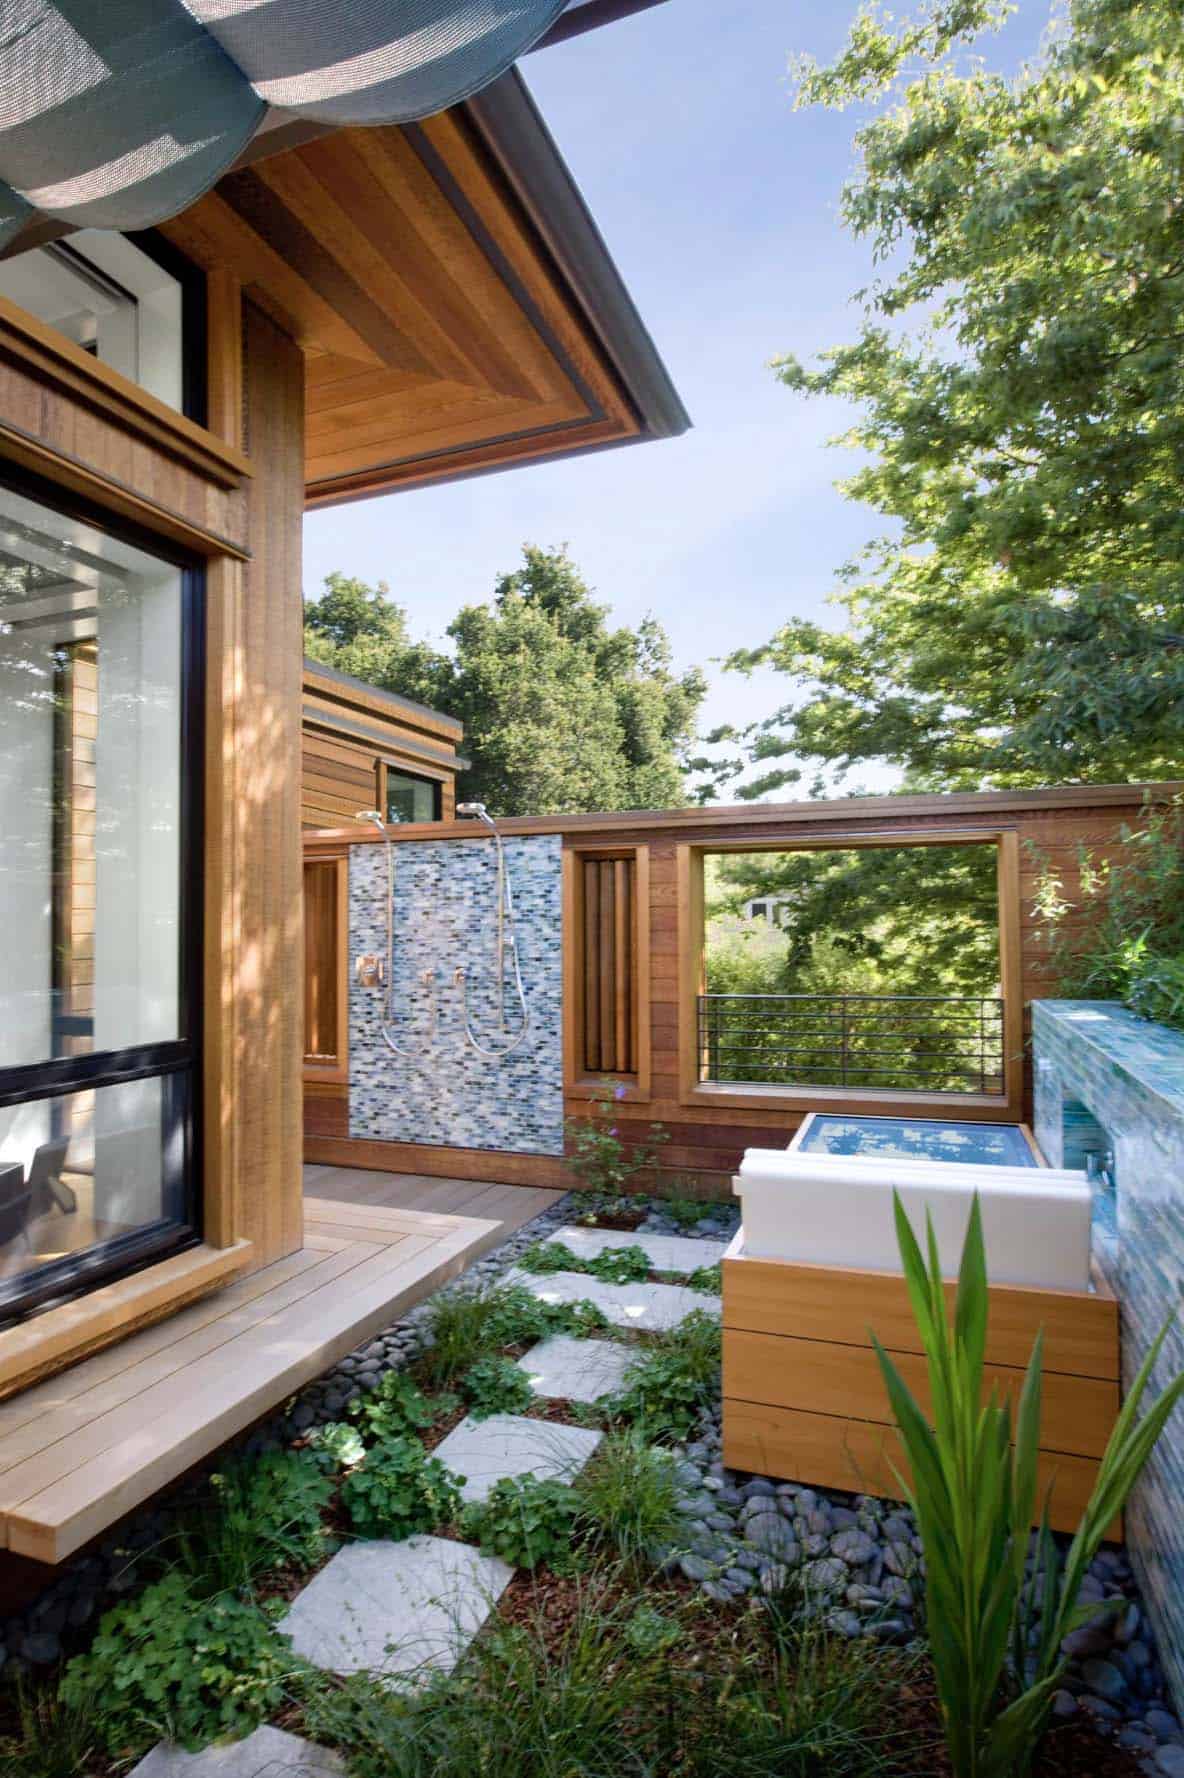 second-floor deck with outdoor shower + tub, living roof, and built-in bench